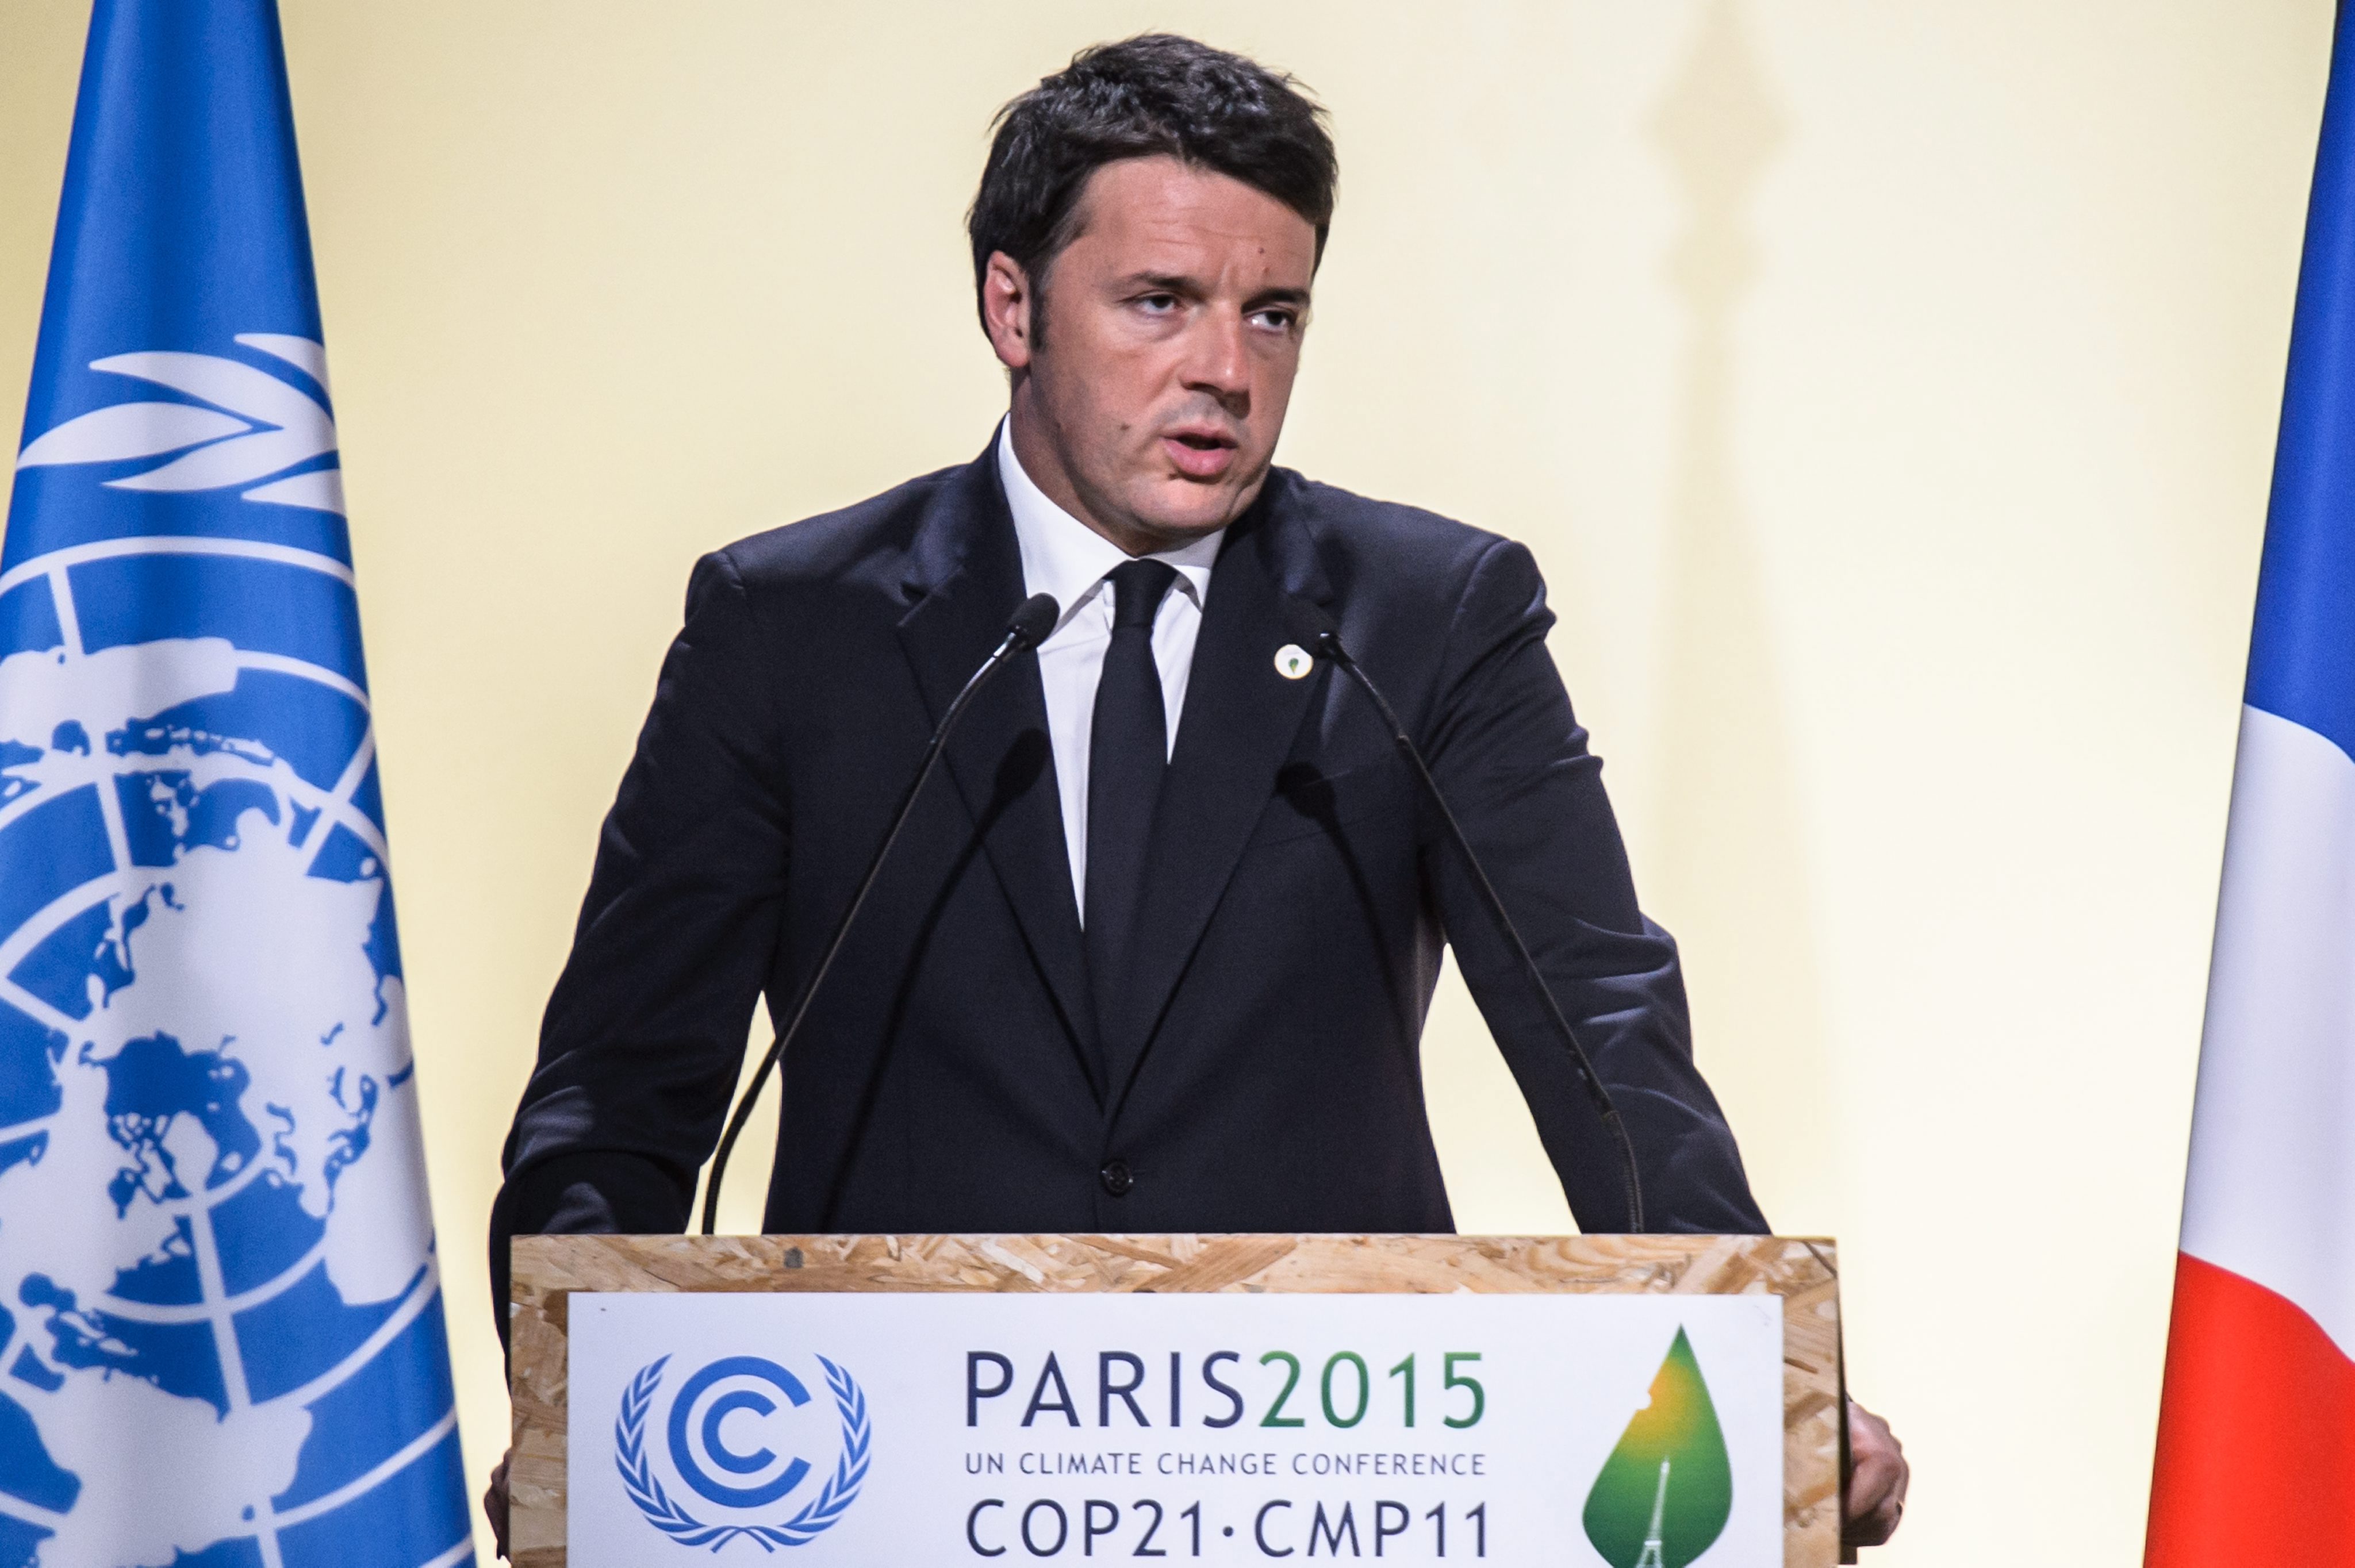 epa05049700 Prime minister of Italy Matteo Renzi delivers his speech as he attends Heads of States' Statements ceremony of the COP21 World Climate Change Conference 2015 in Le Bourget, north of Paris, France, 30 November 2015. The 21st Conference of the Parties (COP21) is held in Paris from 30 November to 11 December aimed at reaching an international agreement to limit greenhouse gas emissions and curtail climate change.  EPA/CHRISTOPHE PETIT TESSON